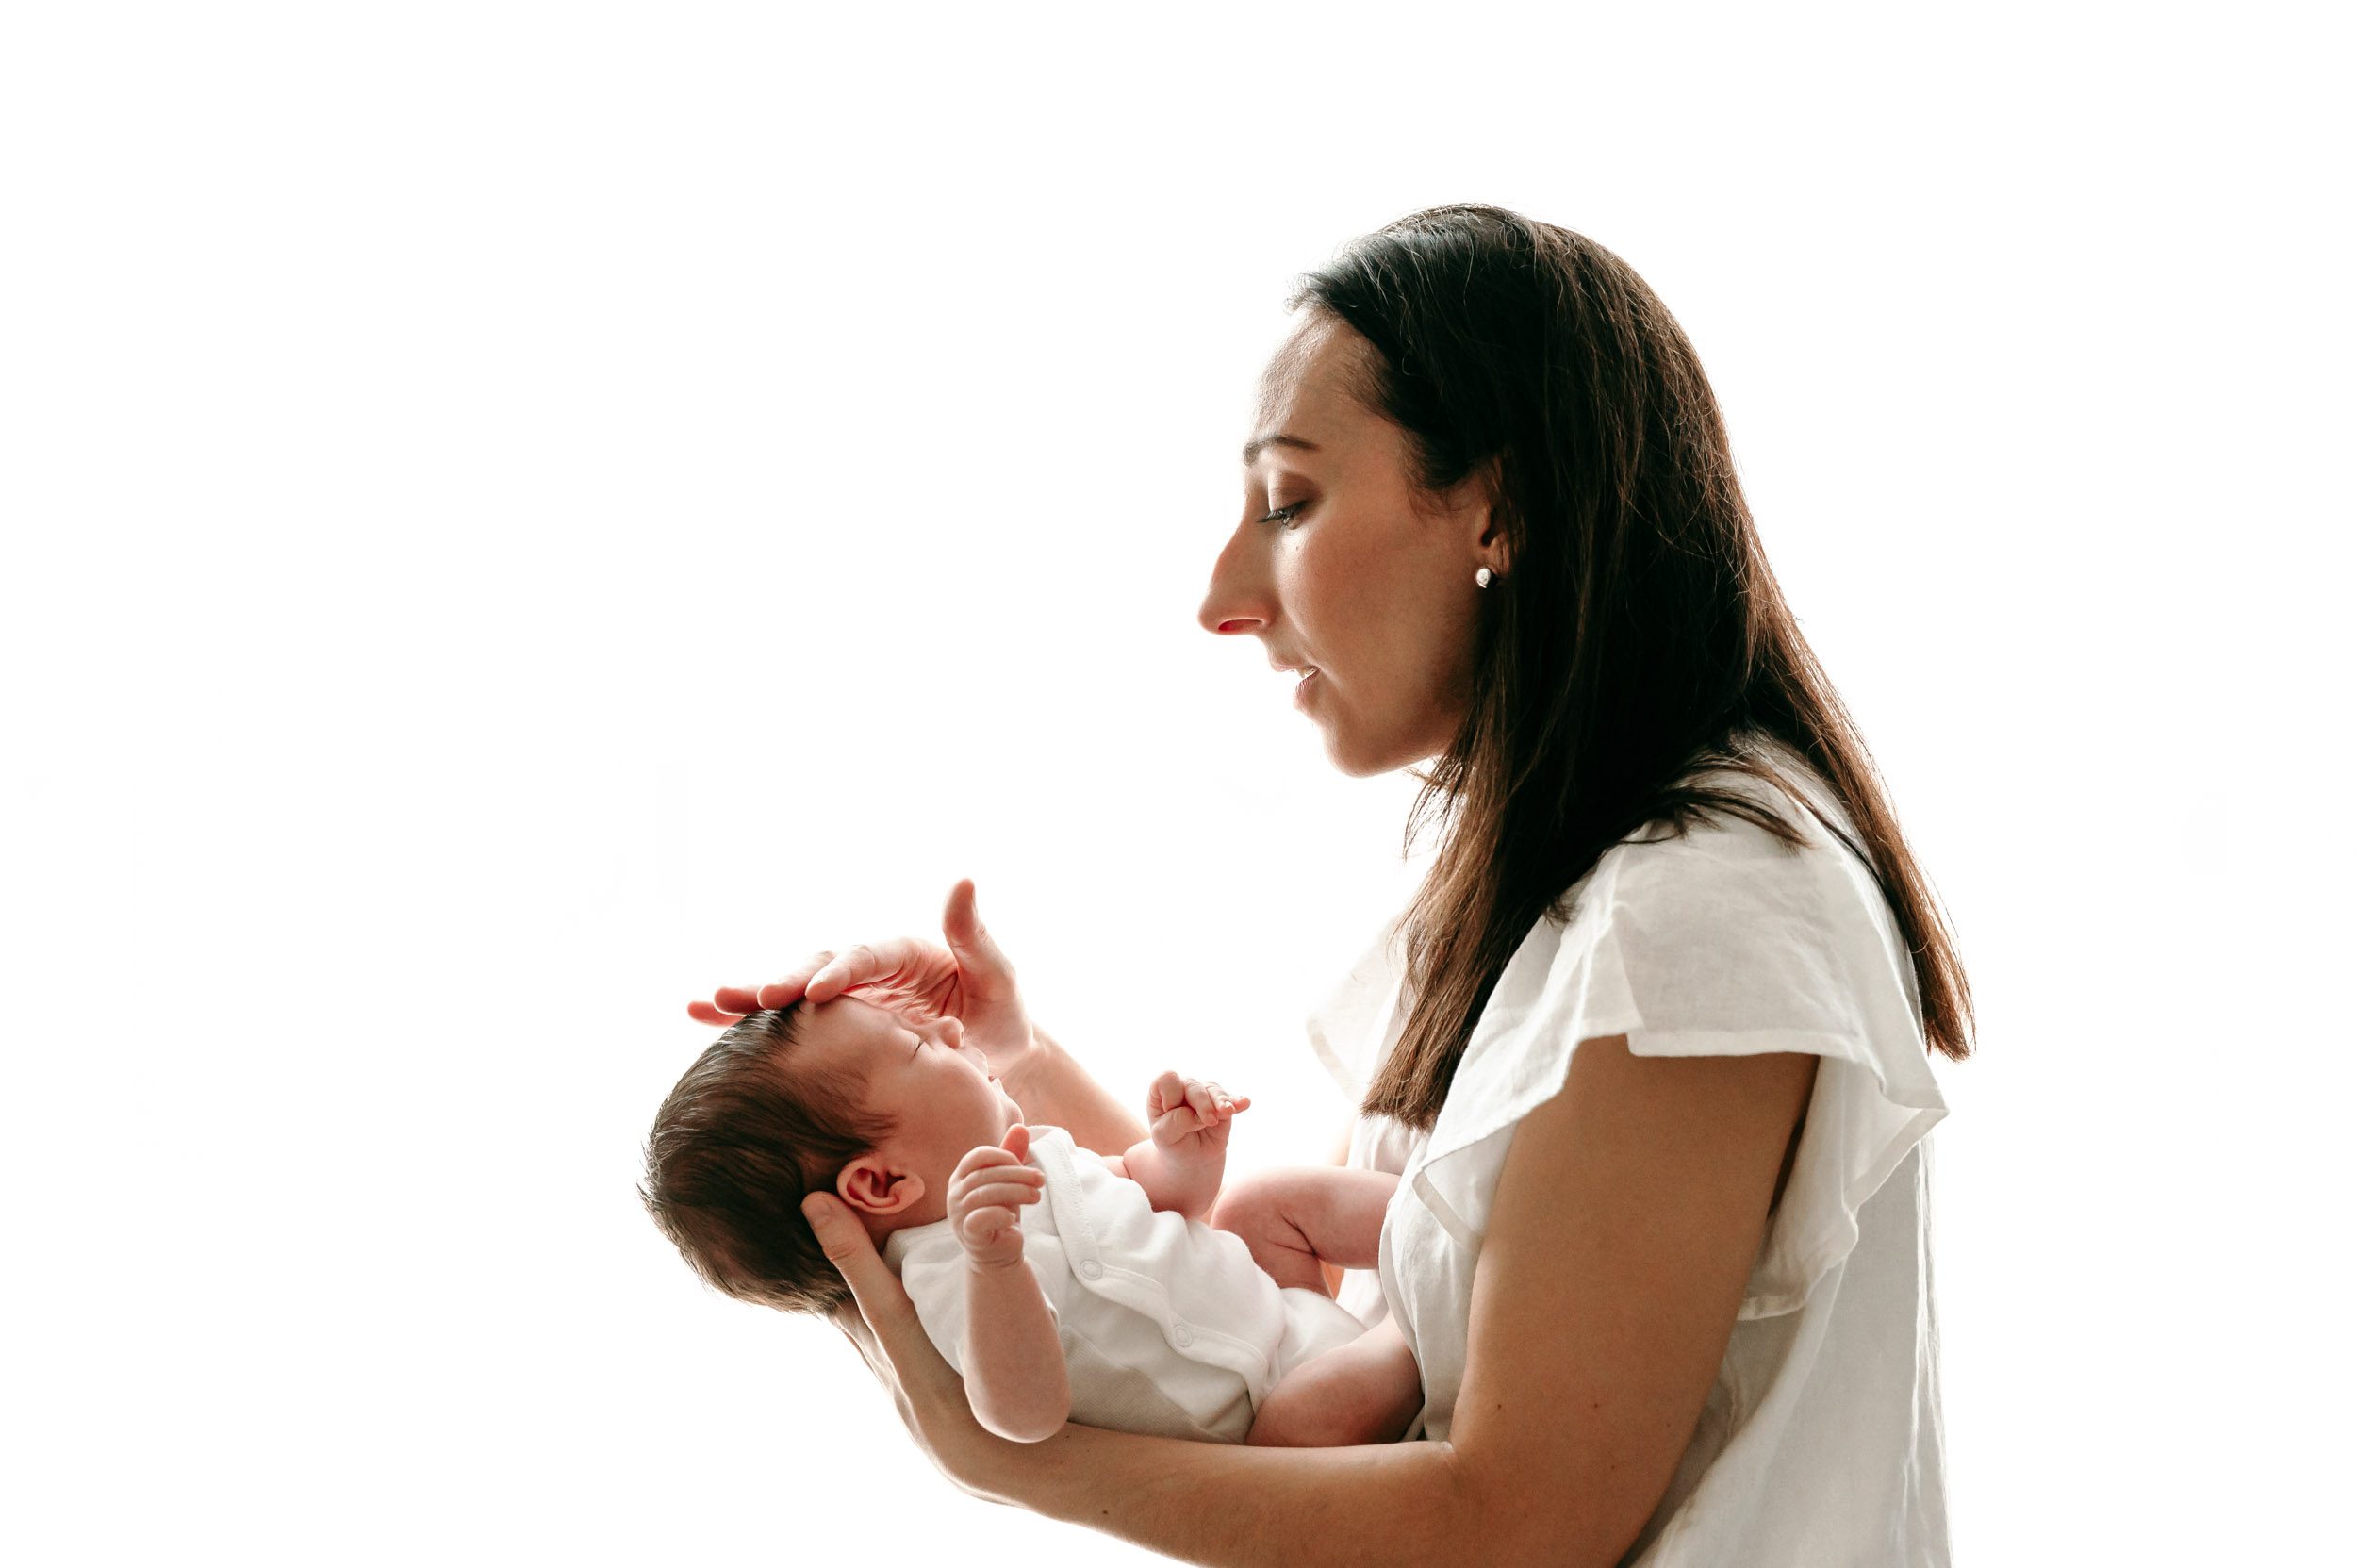 a backlit photo of a new mom wearing a white blouse gently touching her baby boy on the head as she gazes down at him adoringly during a newborn photos session